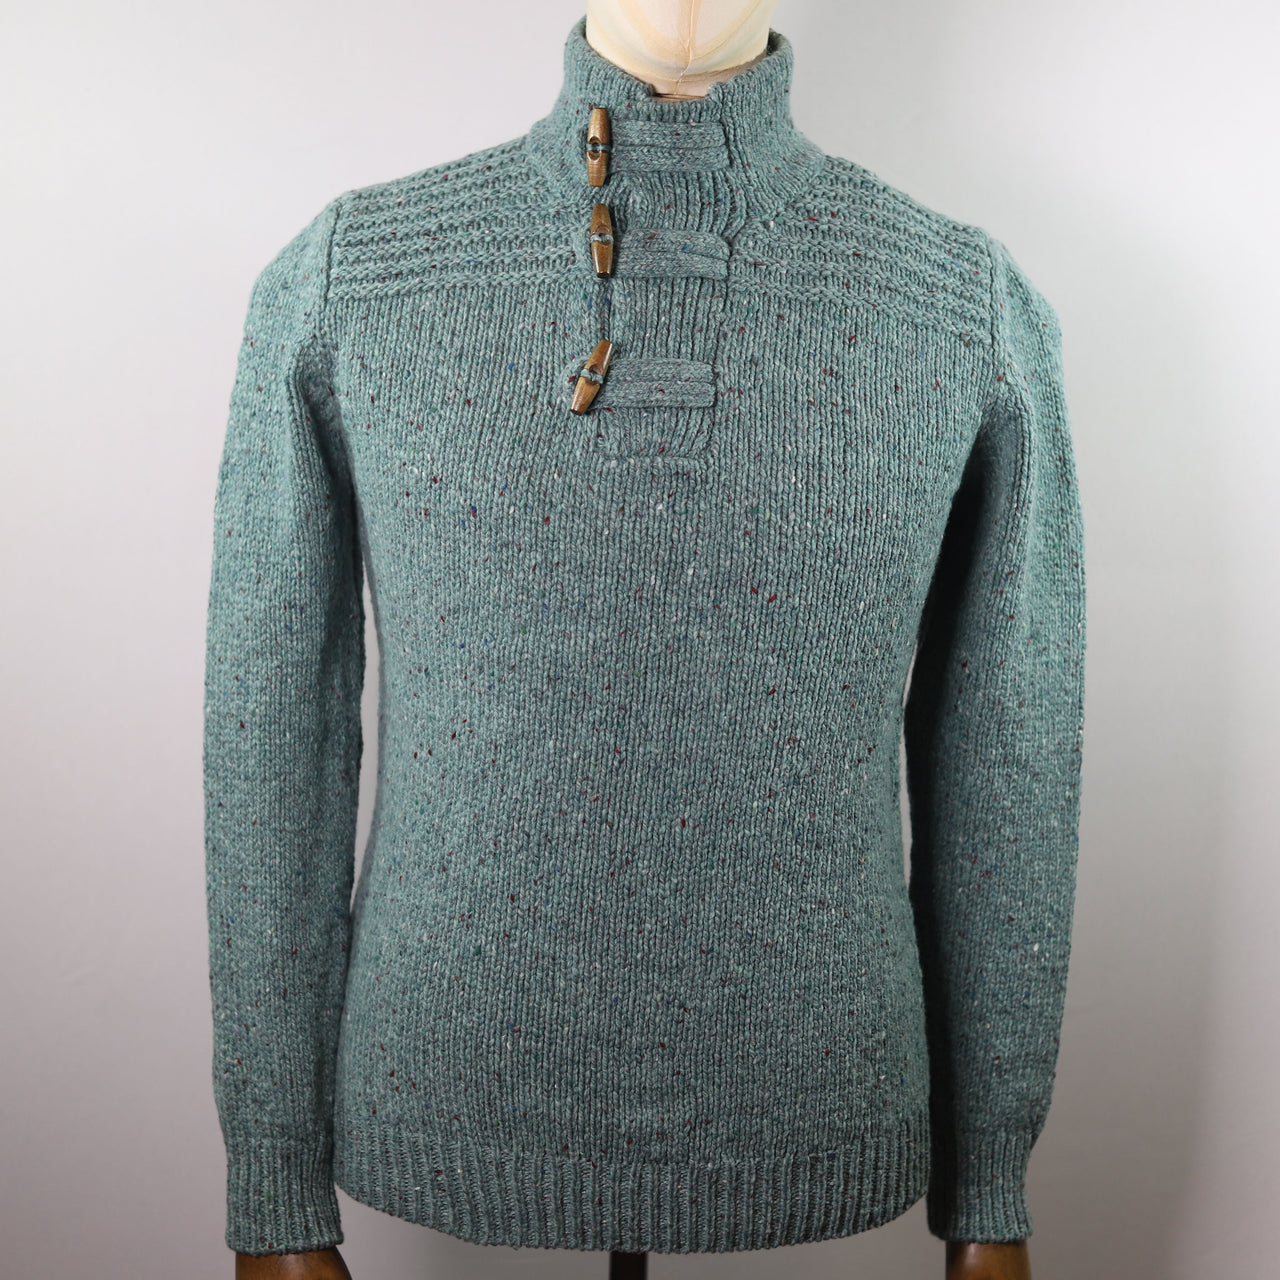 Fisherman Out Of Ireland Toggle Neck Sweater - Jade